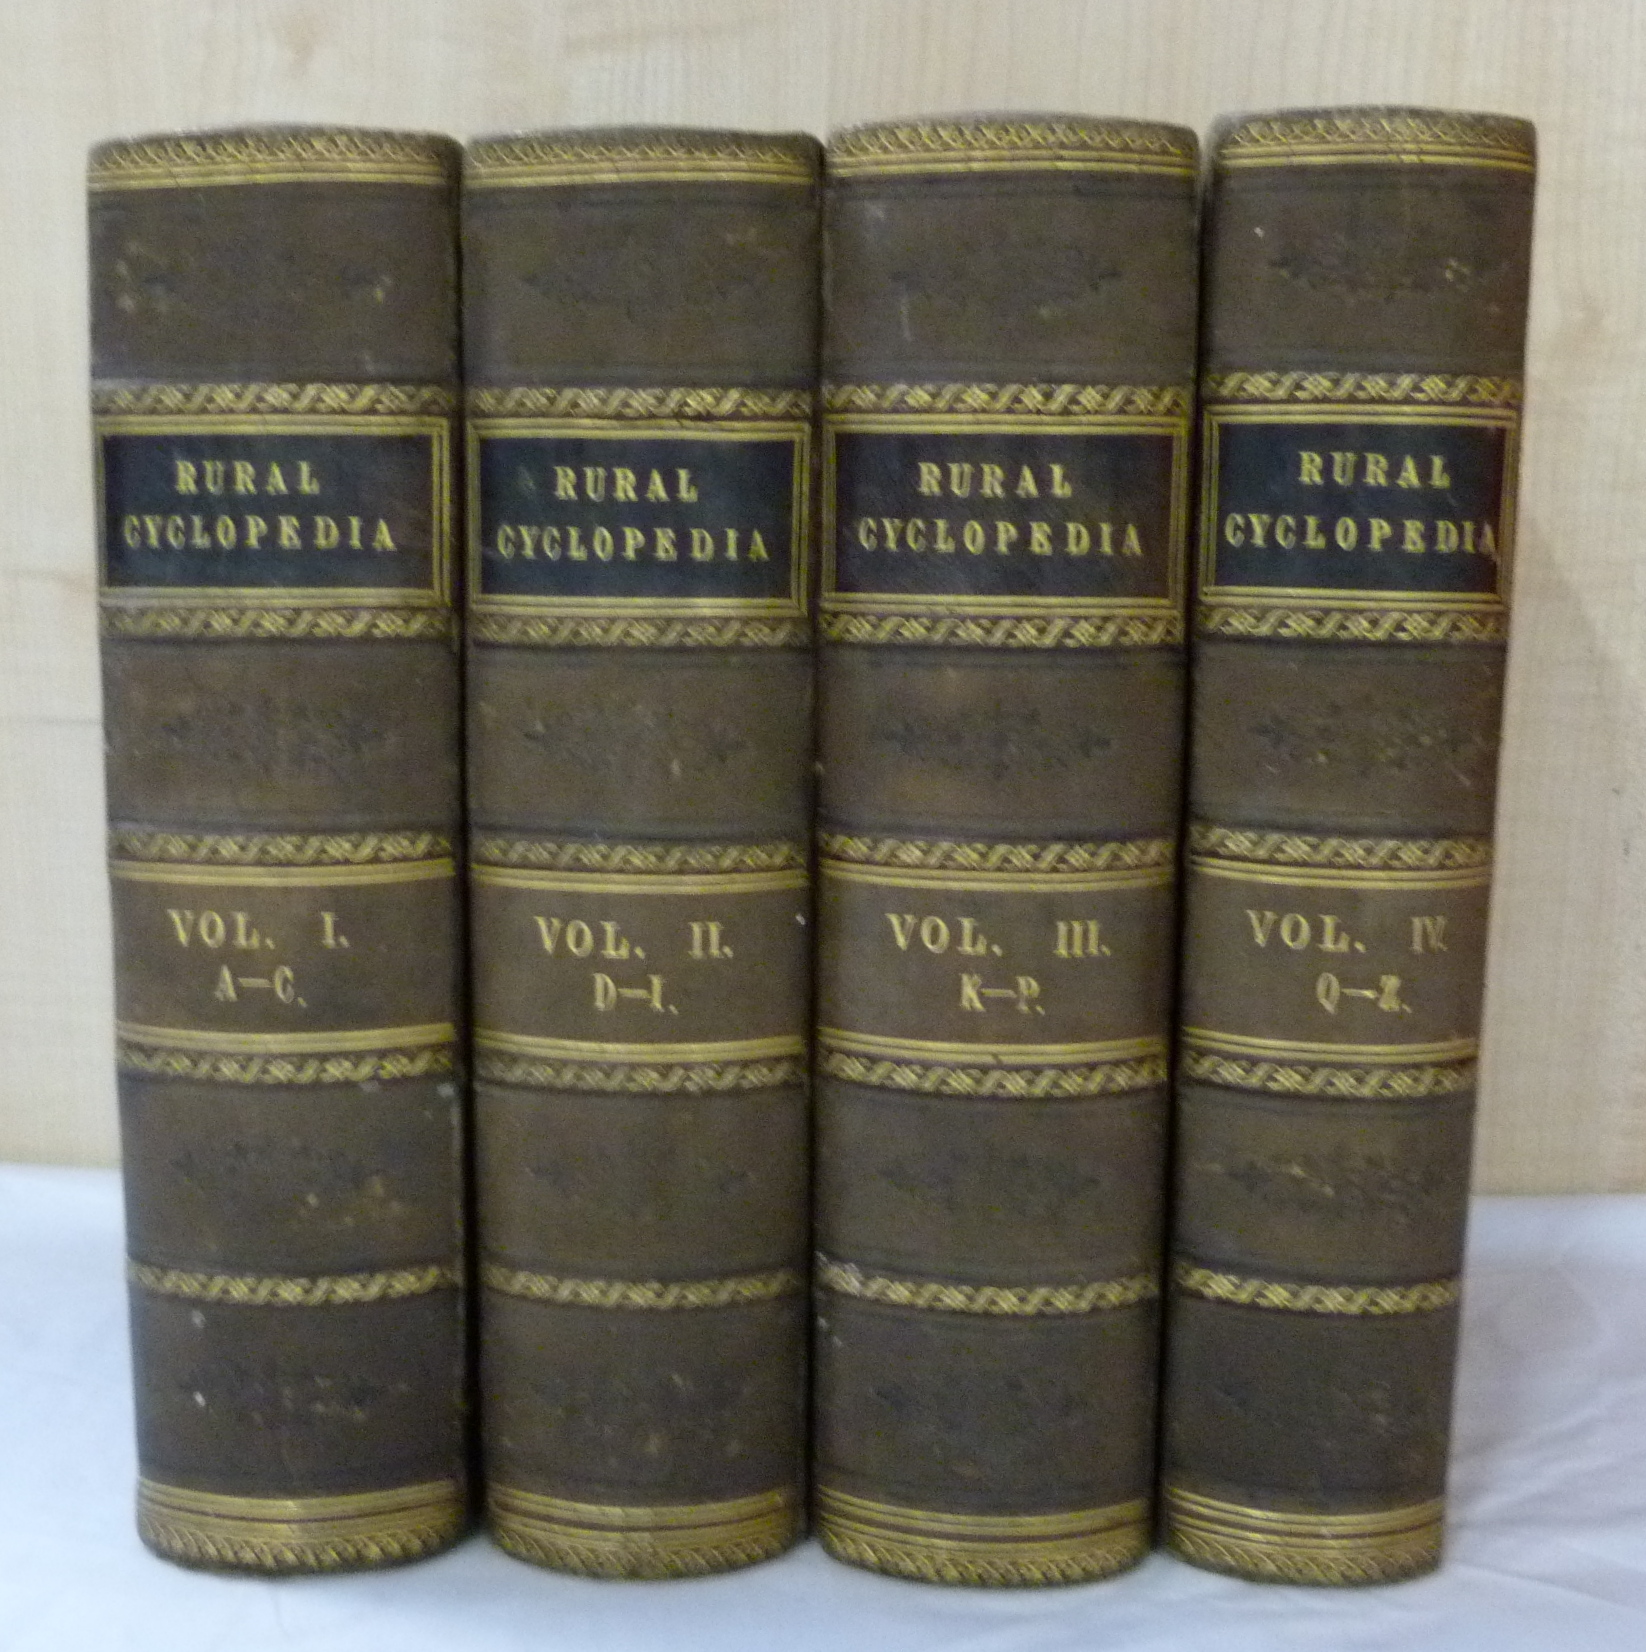 WILSON JOHN M.  The Rural Cyclopedia or A General Dictionary of Agriculture. 4 vols. Hand col.